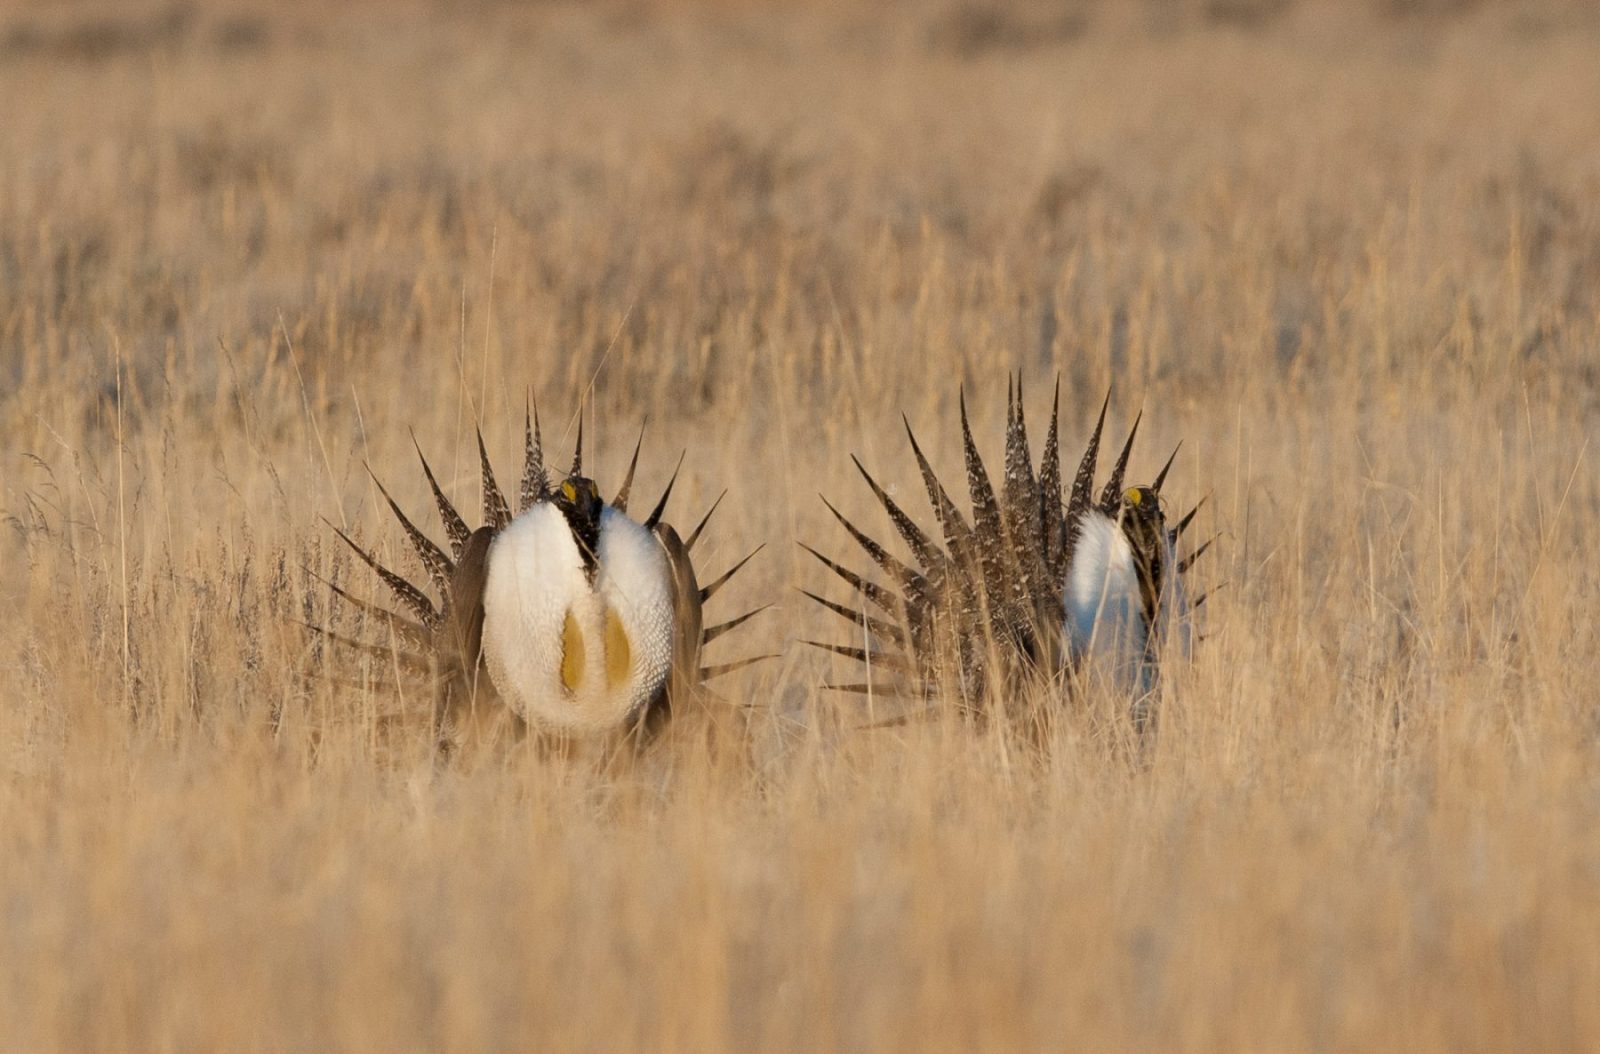 Speak out for the Greater sage-grouse, and our western heritage